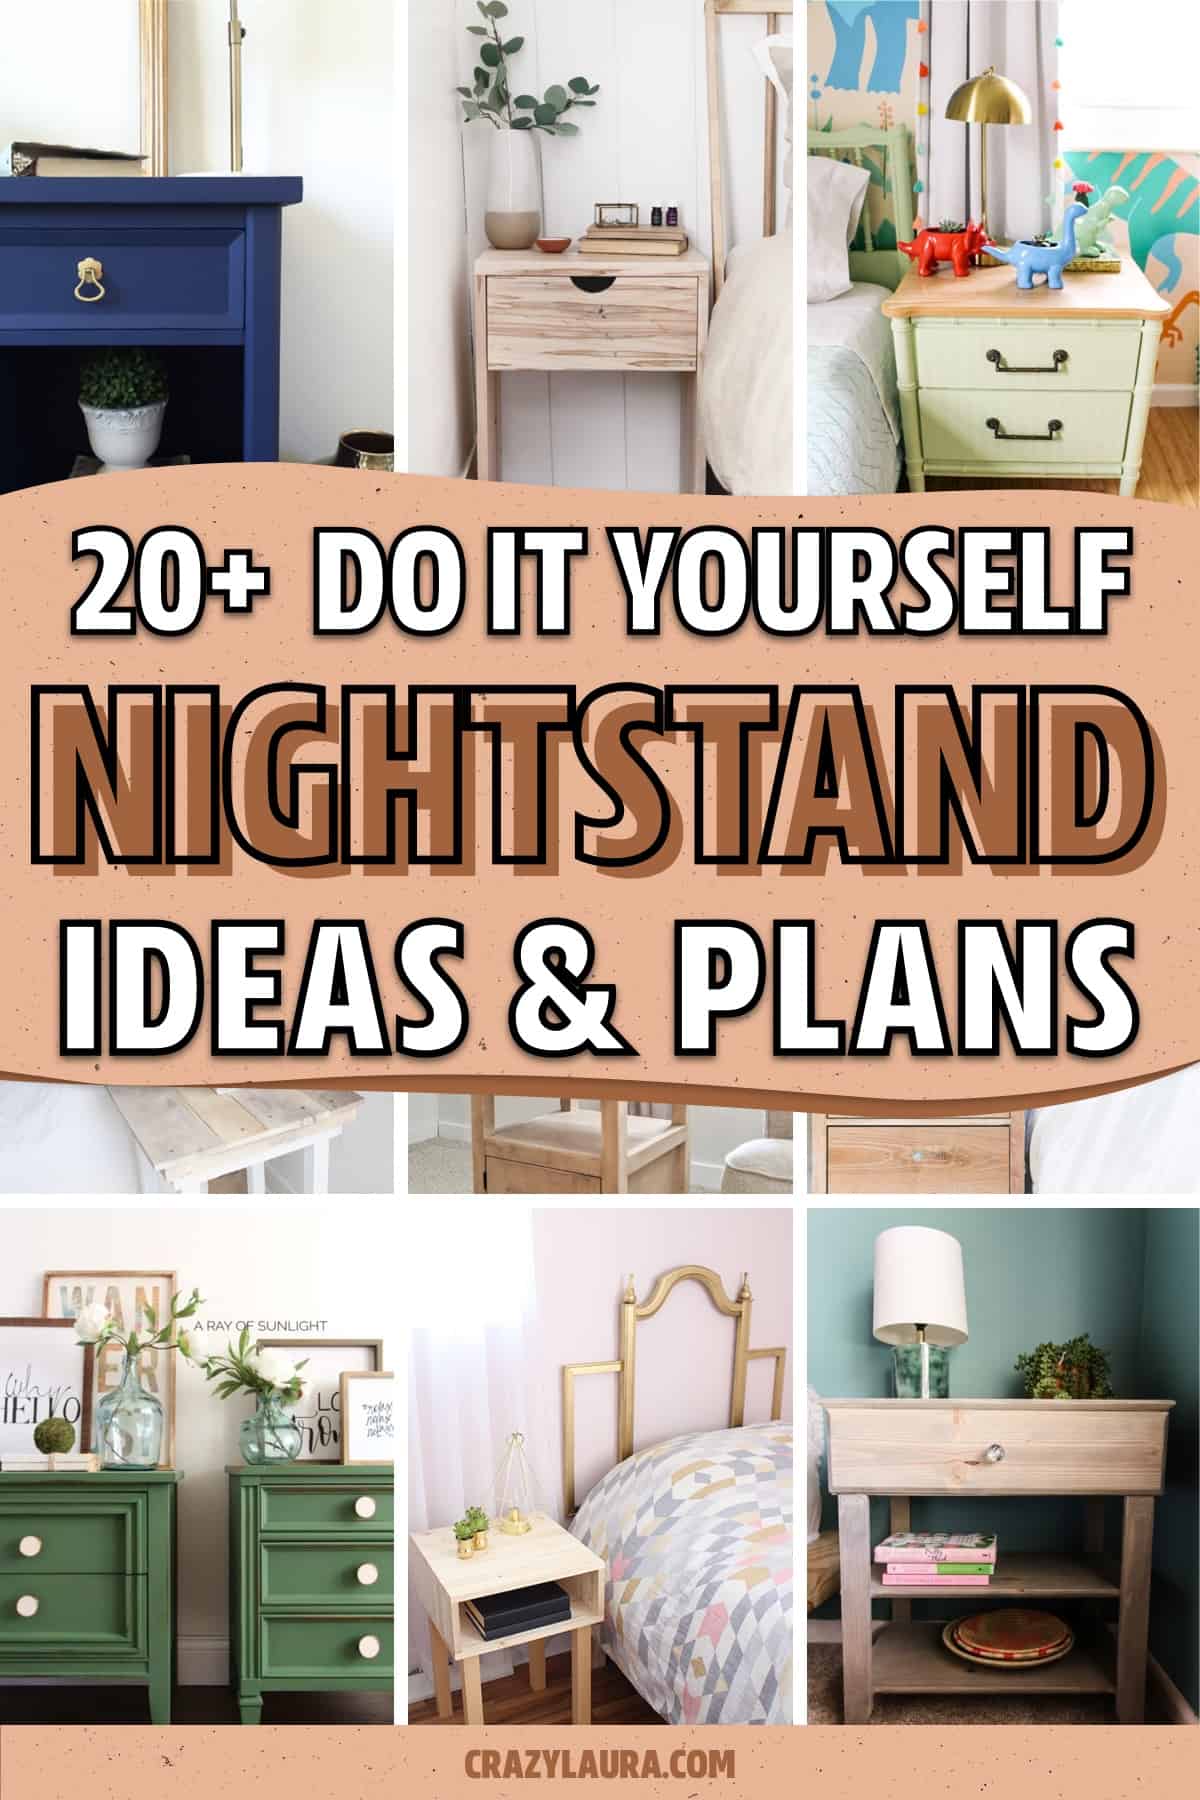 handcrafted nightstand ideas for inspo